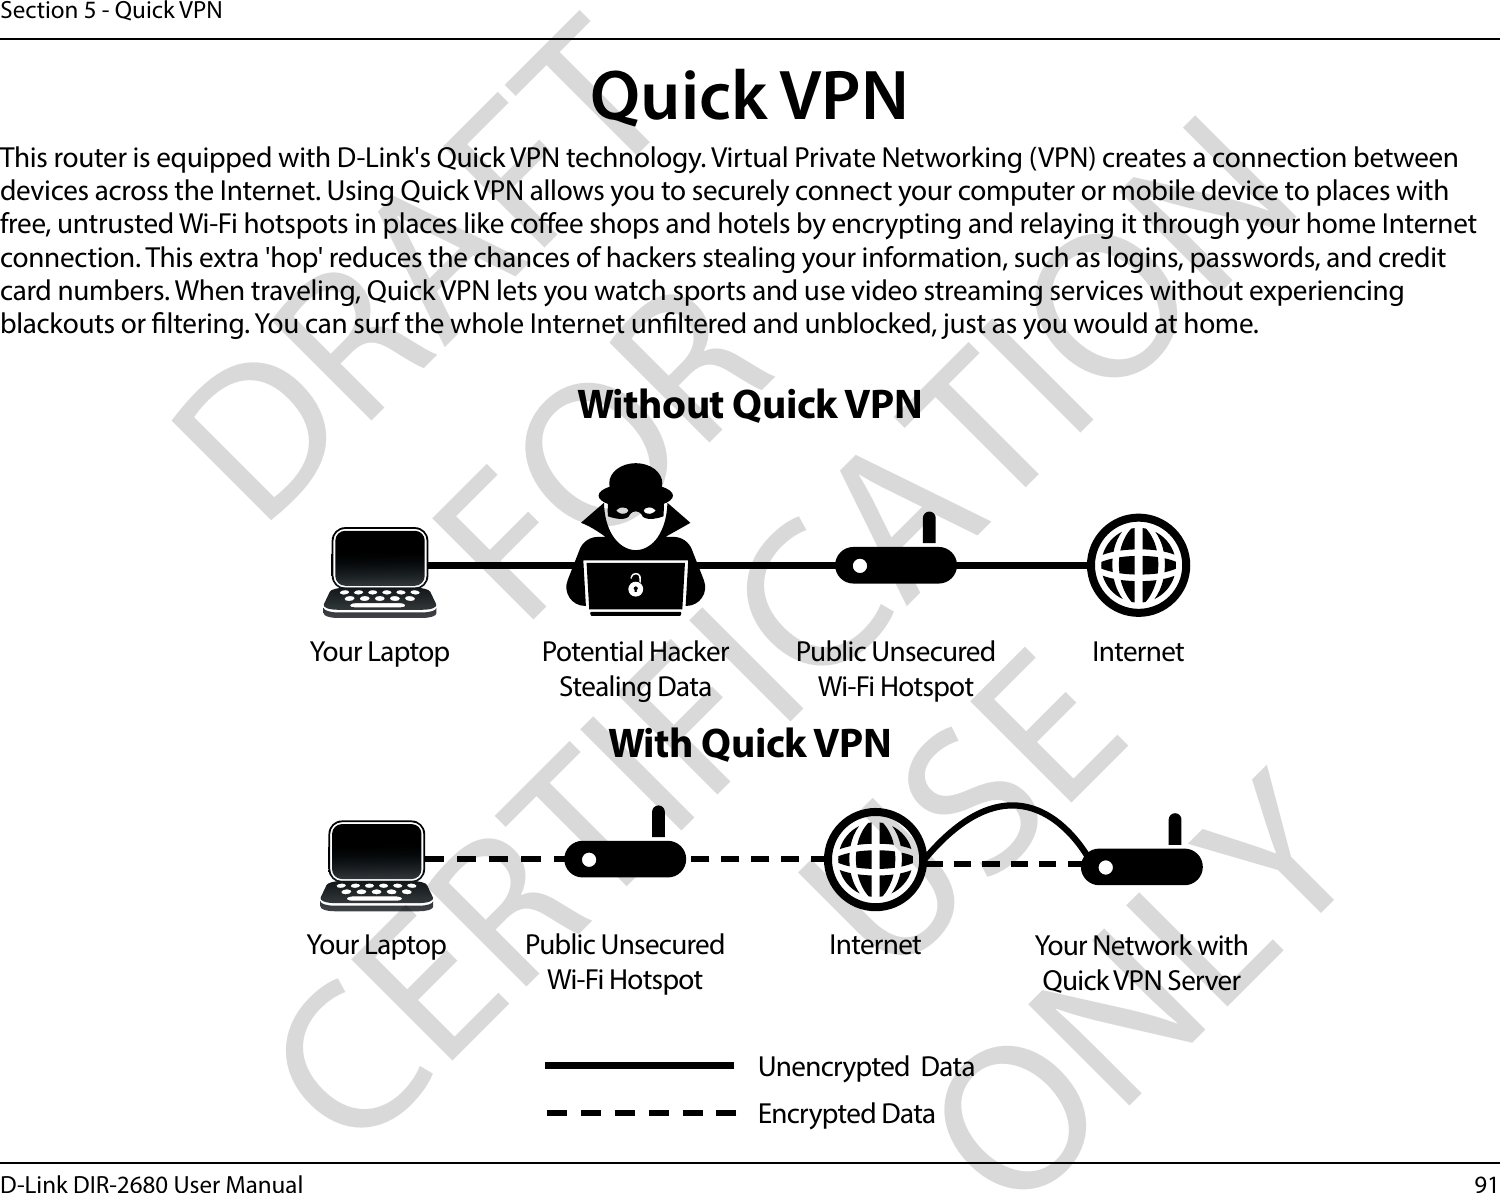 91D-Link DIR-2680 User ManualSection 5 - Quick VPNWith Quick VPNUnencrypted DataEncrypted DataYour Network with Quick VPN ServerInternetPublic Unsecured Wi-Fi HotspotYour LaptopThis router is equipped with D-Link&apos;s Quick VPN technology. Virtual Private Networking (VPN) creates a connection between devices across the Internet. Using Quick VPN allows you to securely connect your computer or mobile device to places with free, untrusted Wi-Fi hotspots in places like coee shops and hotels by encrypting and relaying it through your home Internet connection. This extra &apos;hop&apos; reduces the chances of hackers stealing your information, such as logins, passwords, and credit card numbers. When traveling, Quick VPN lets you watch sports and use video streaming services without experiencing blackouts or ltering. You can surf the whole Internet unltered and unblocked, just as you would at home.Public Unsecured Wi-Fi HotspotInternetYour Laptop Potential Hacker Stealing DataWithout Quick VPNQuick VPNDRAFT FOR CERTIFICATION USE ONLY